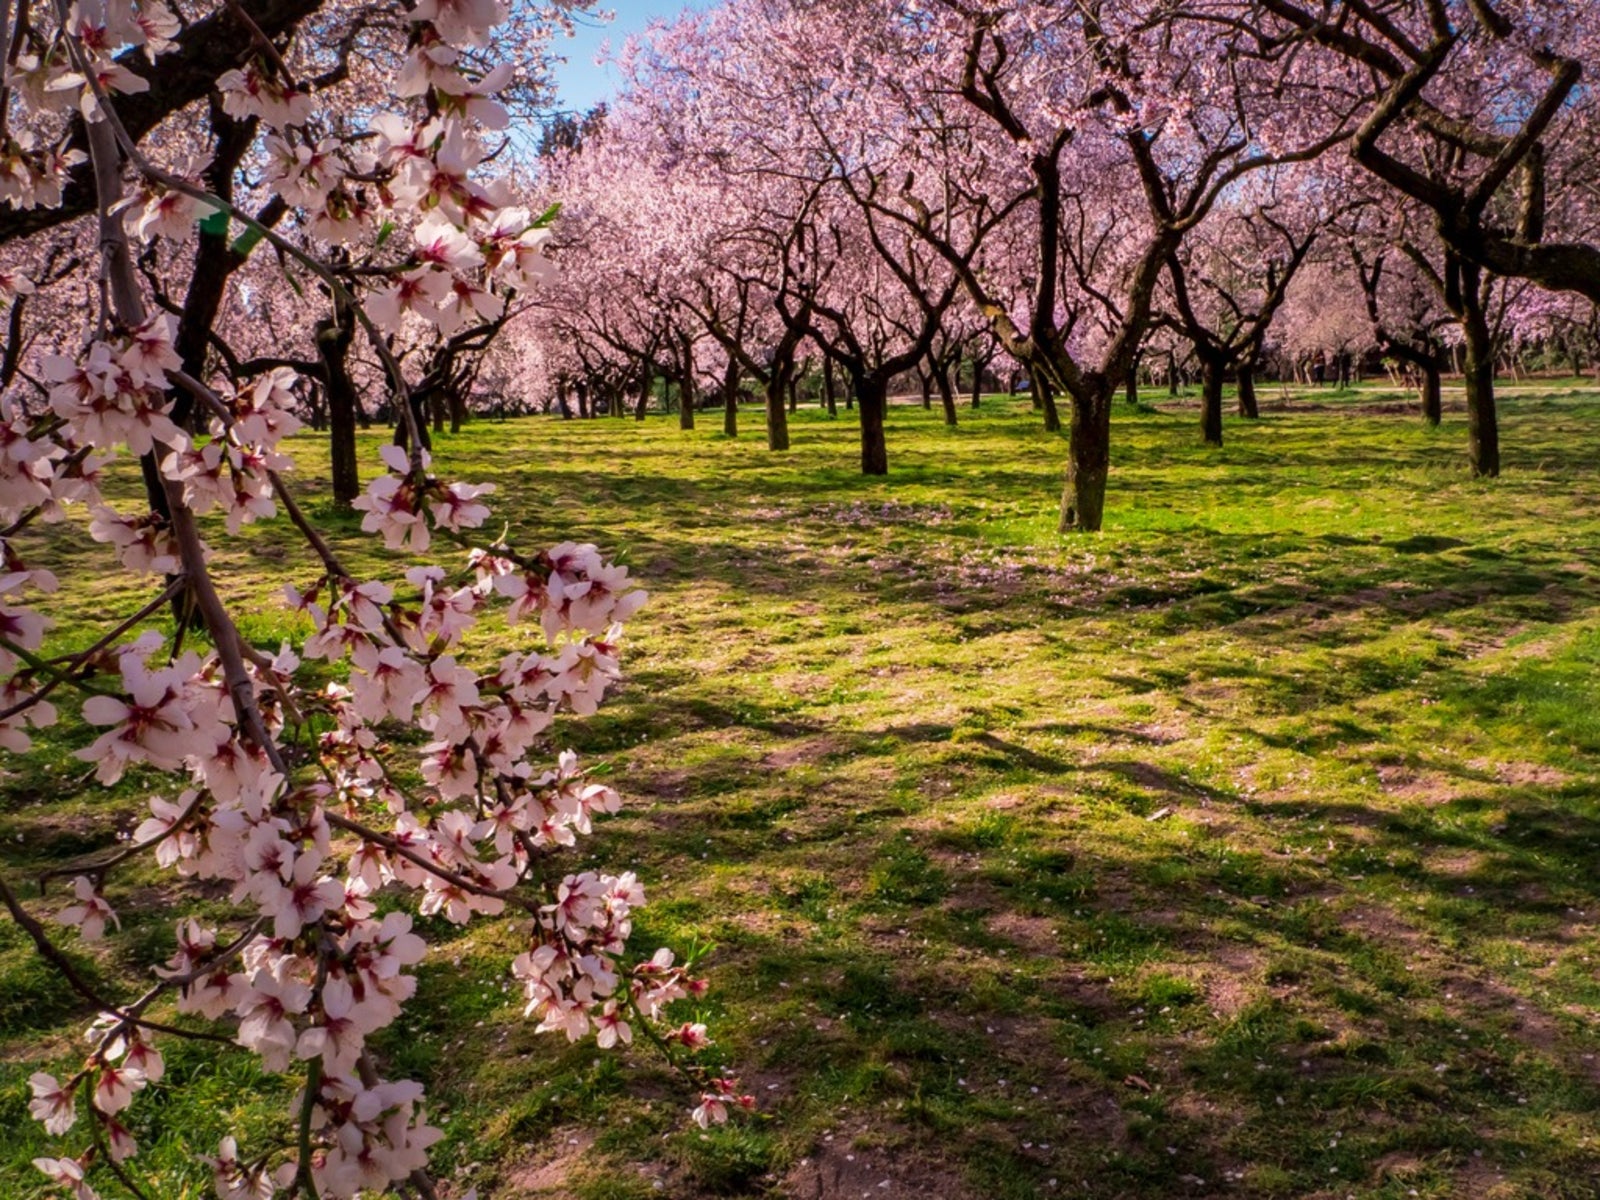 Flowering Pink Almond - How To Care For Growing Flowering Almonds